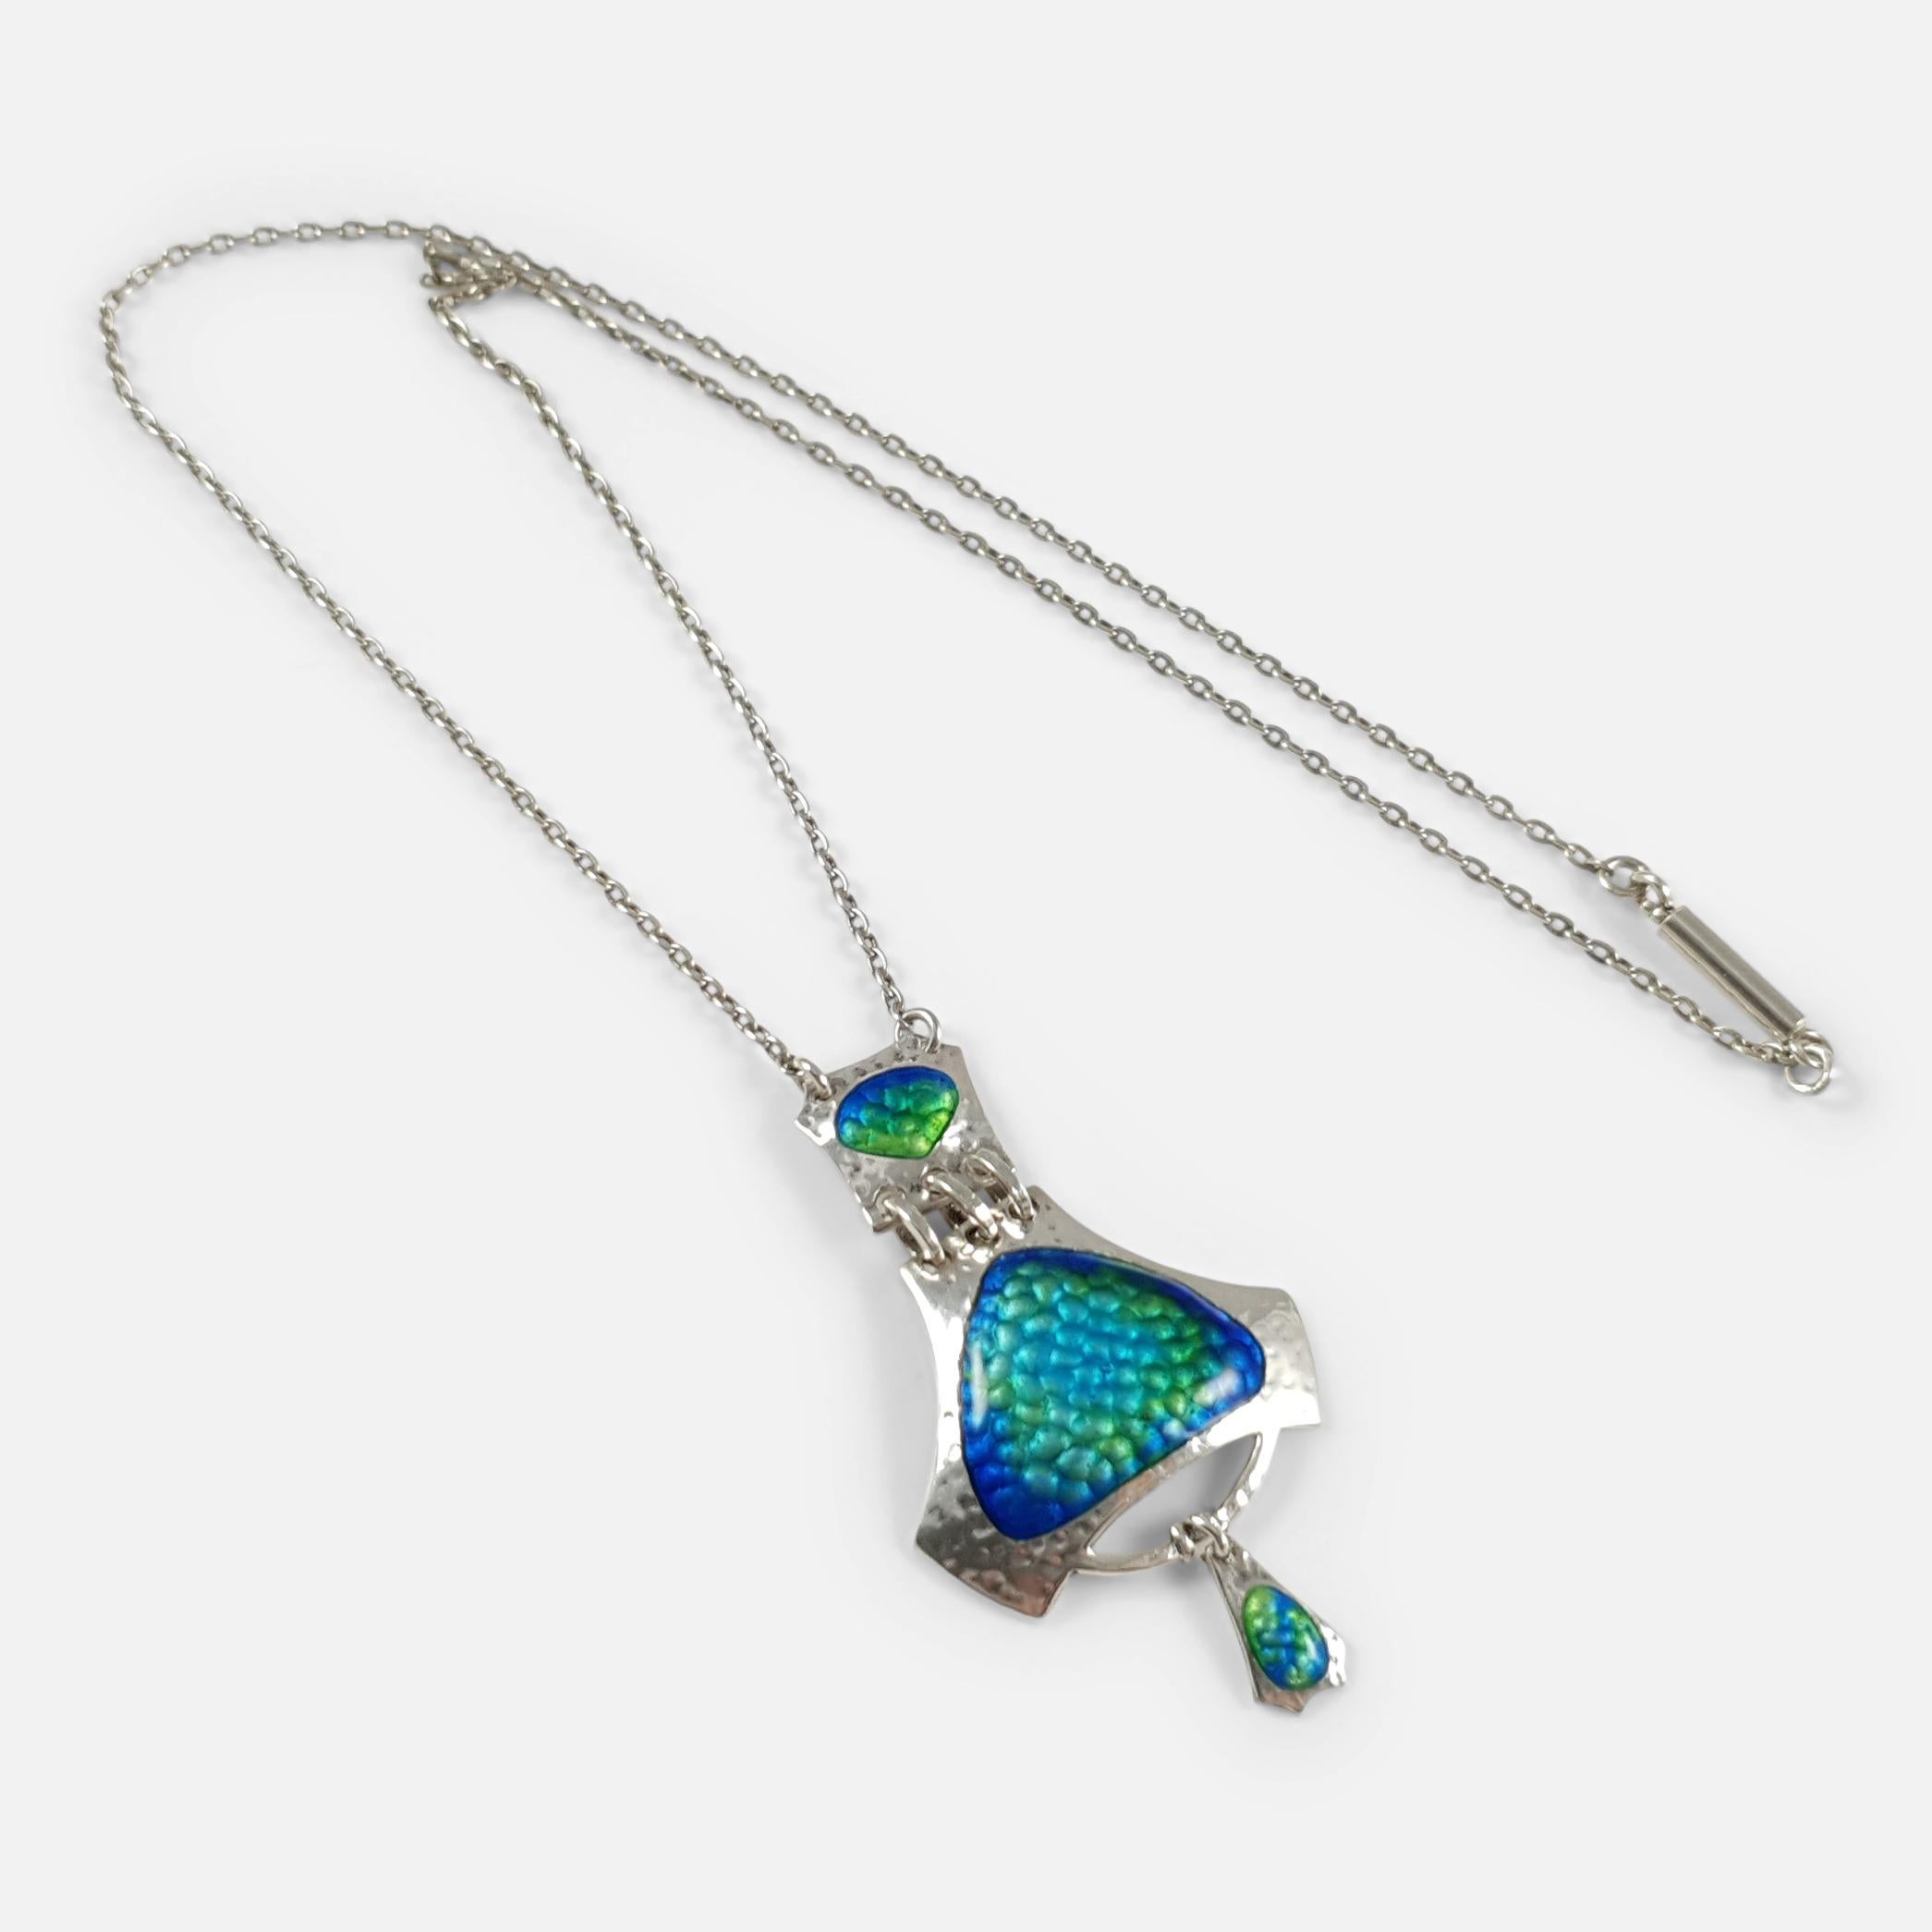 Arts and Crafts 1909 Smith & Ewen Arts & Crafts Sterling Silver Enamel Pendant Necklace